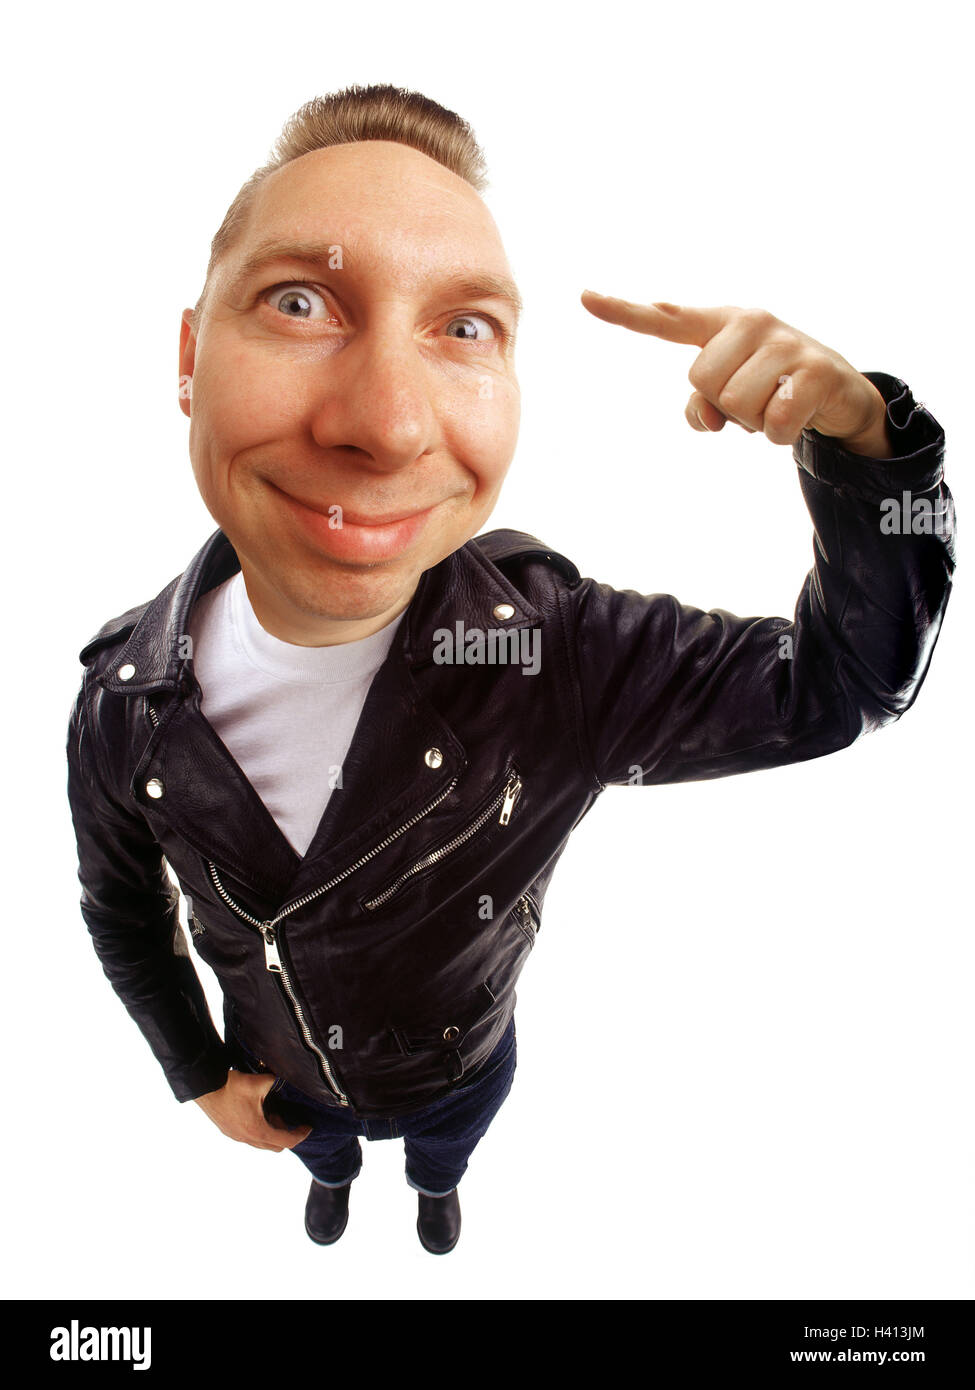 Man, young, leather ball jacket, gesture, 'Vogel point', smile, makes unfamiliar Men, wide angle, near, studio, cut out, insults, annoyance, conflict, fight, impolitely, impertinently, nasty, distorts, Stock Photo